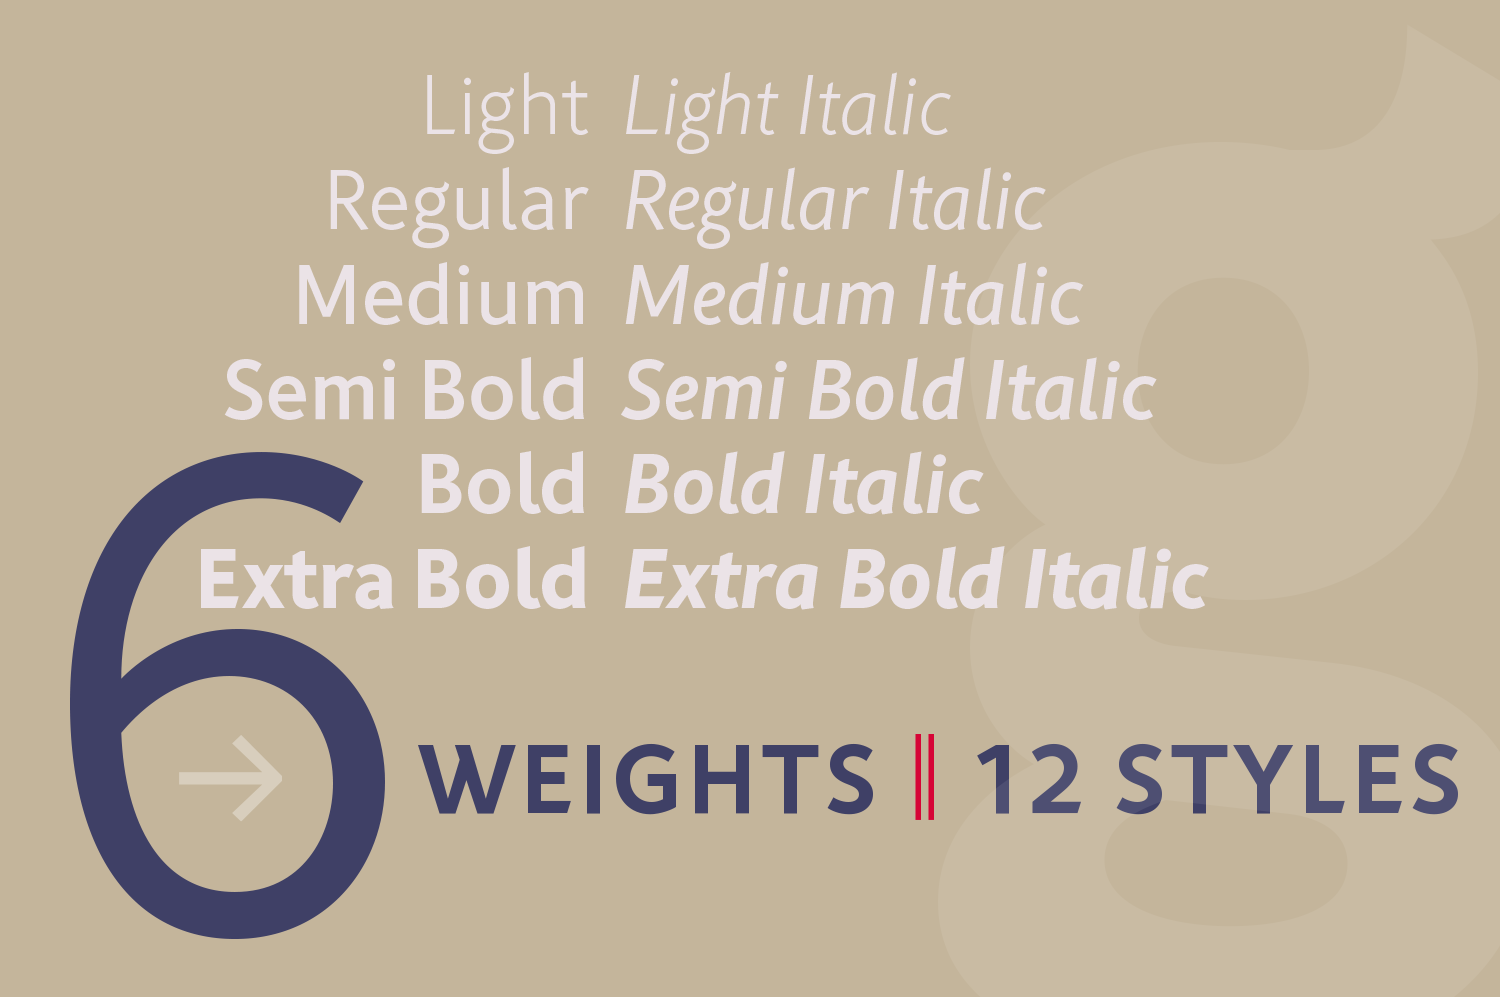 Rahere Sans consists of 6 weights and 12 styles